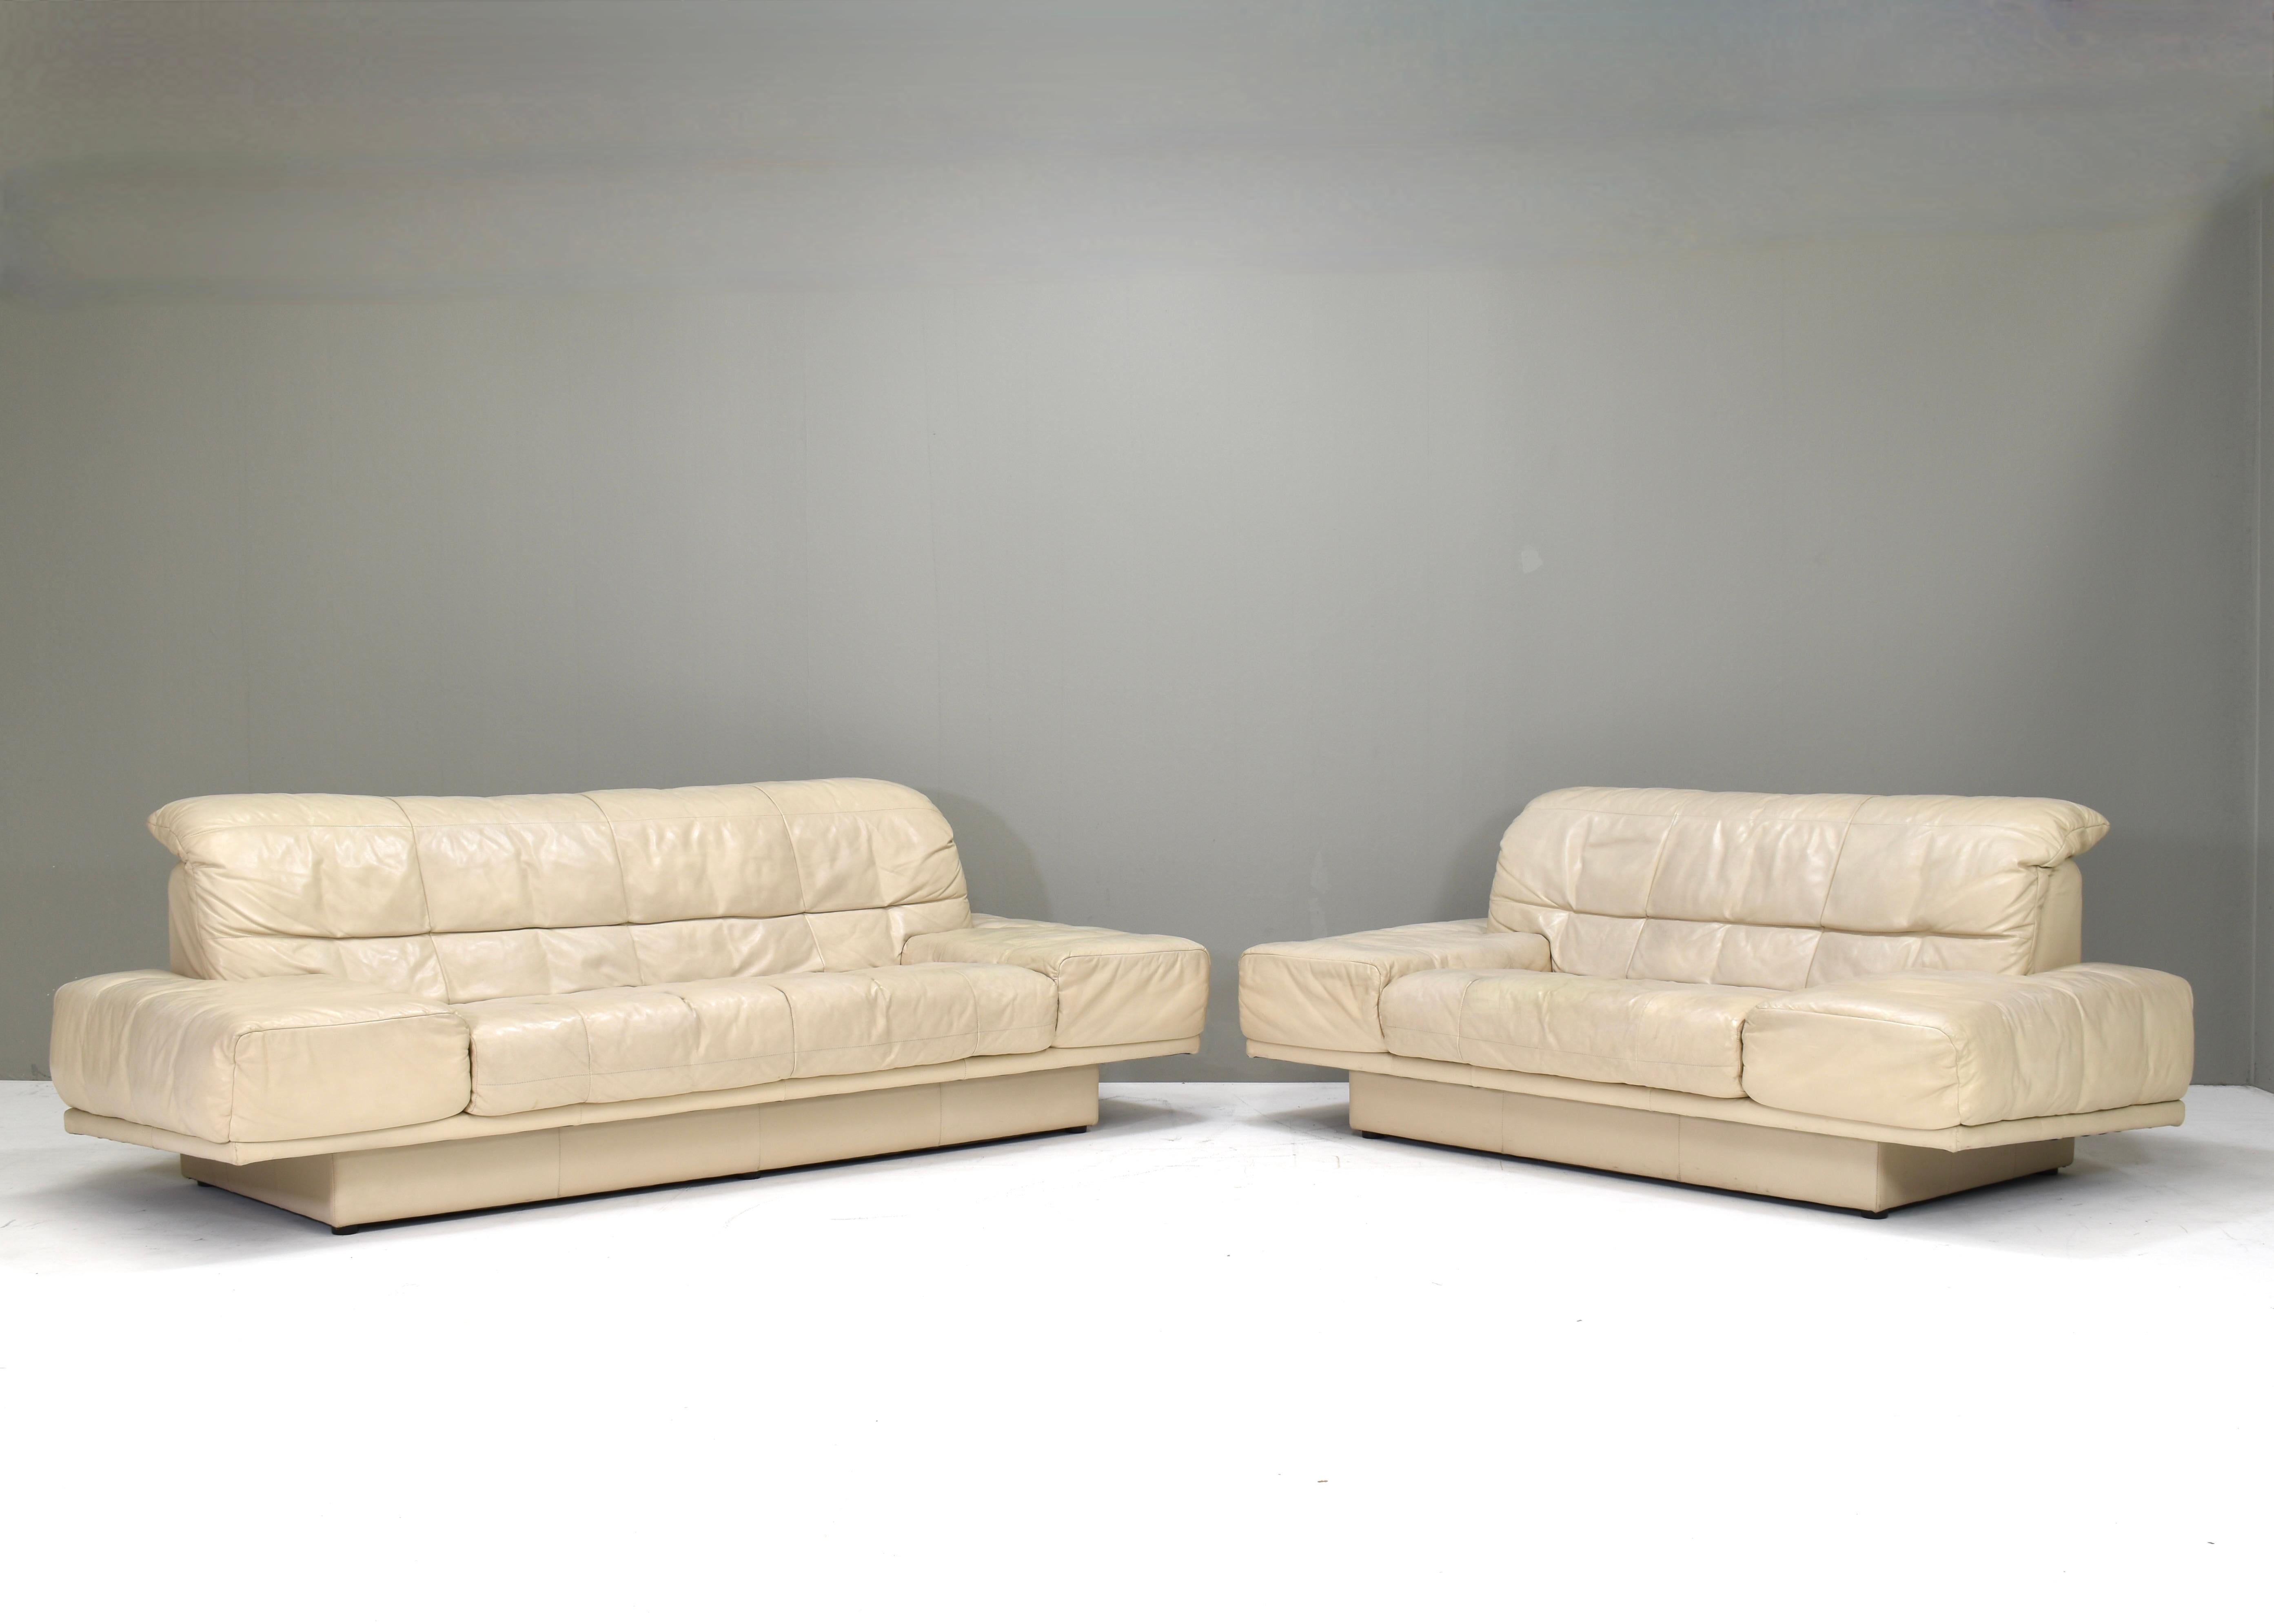 Rolf Benz 3-seat sofa in Ivory Cream Leather – Germany, circa 1980-1990 For Sale 3